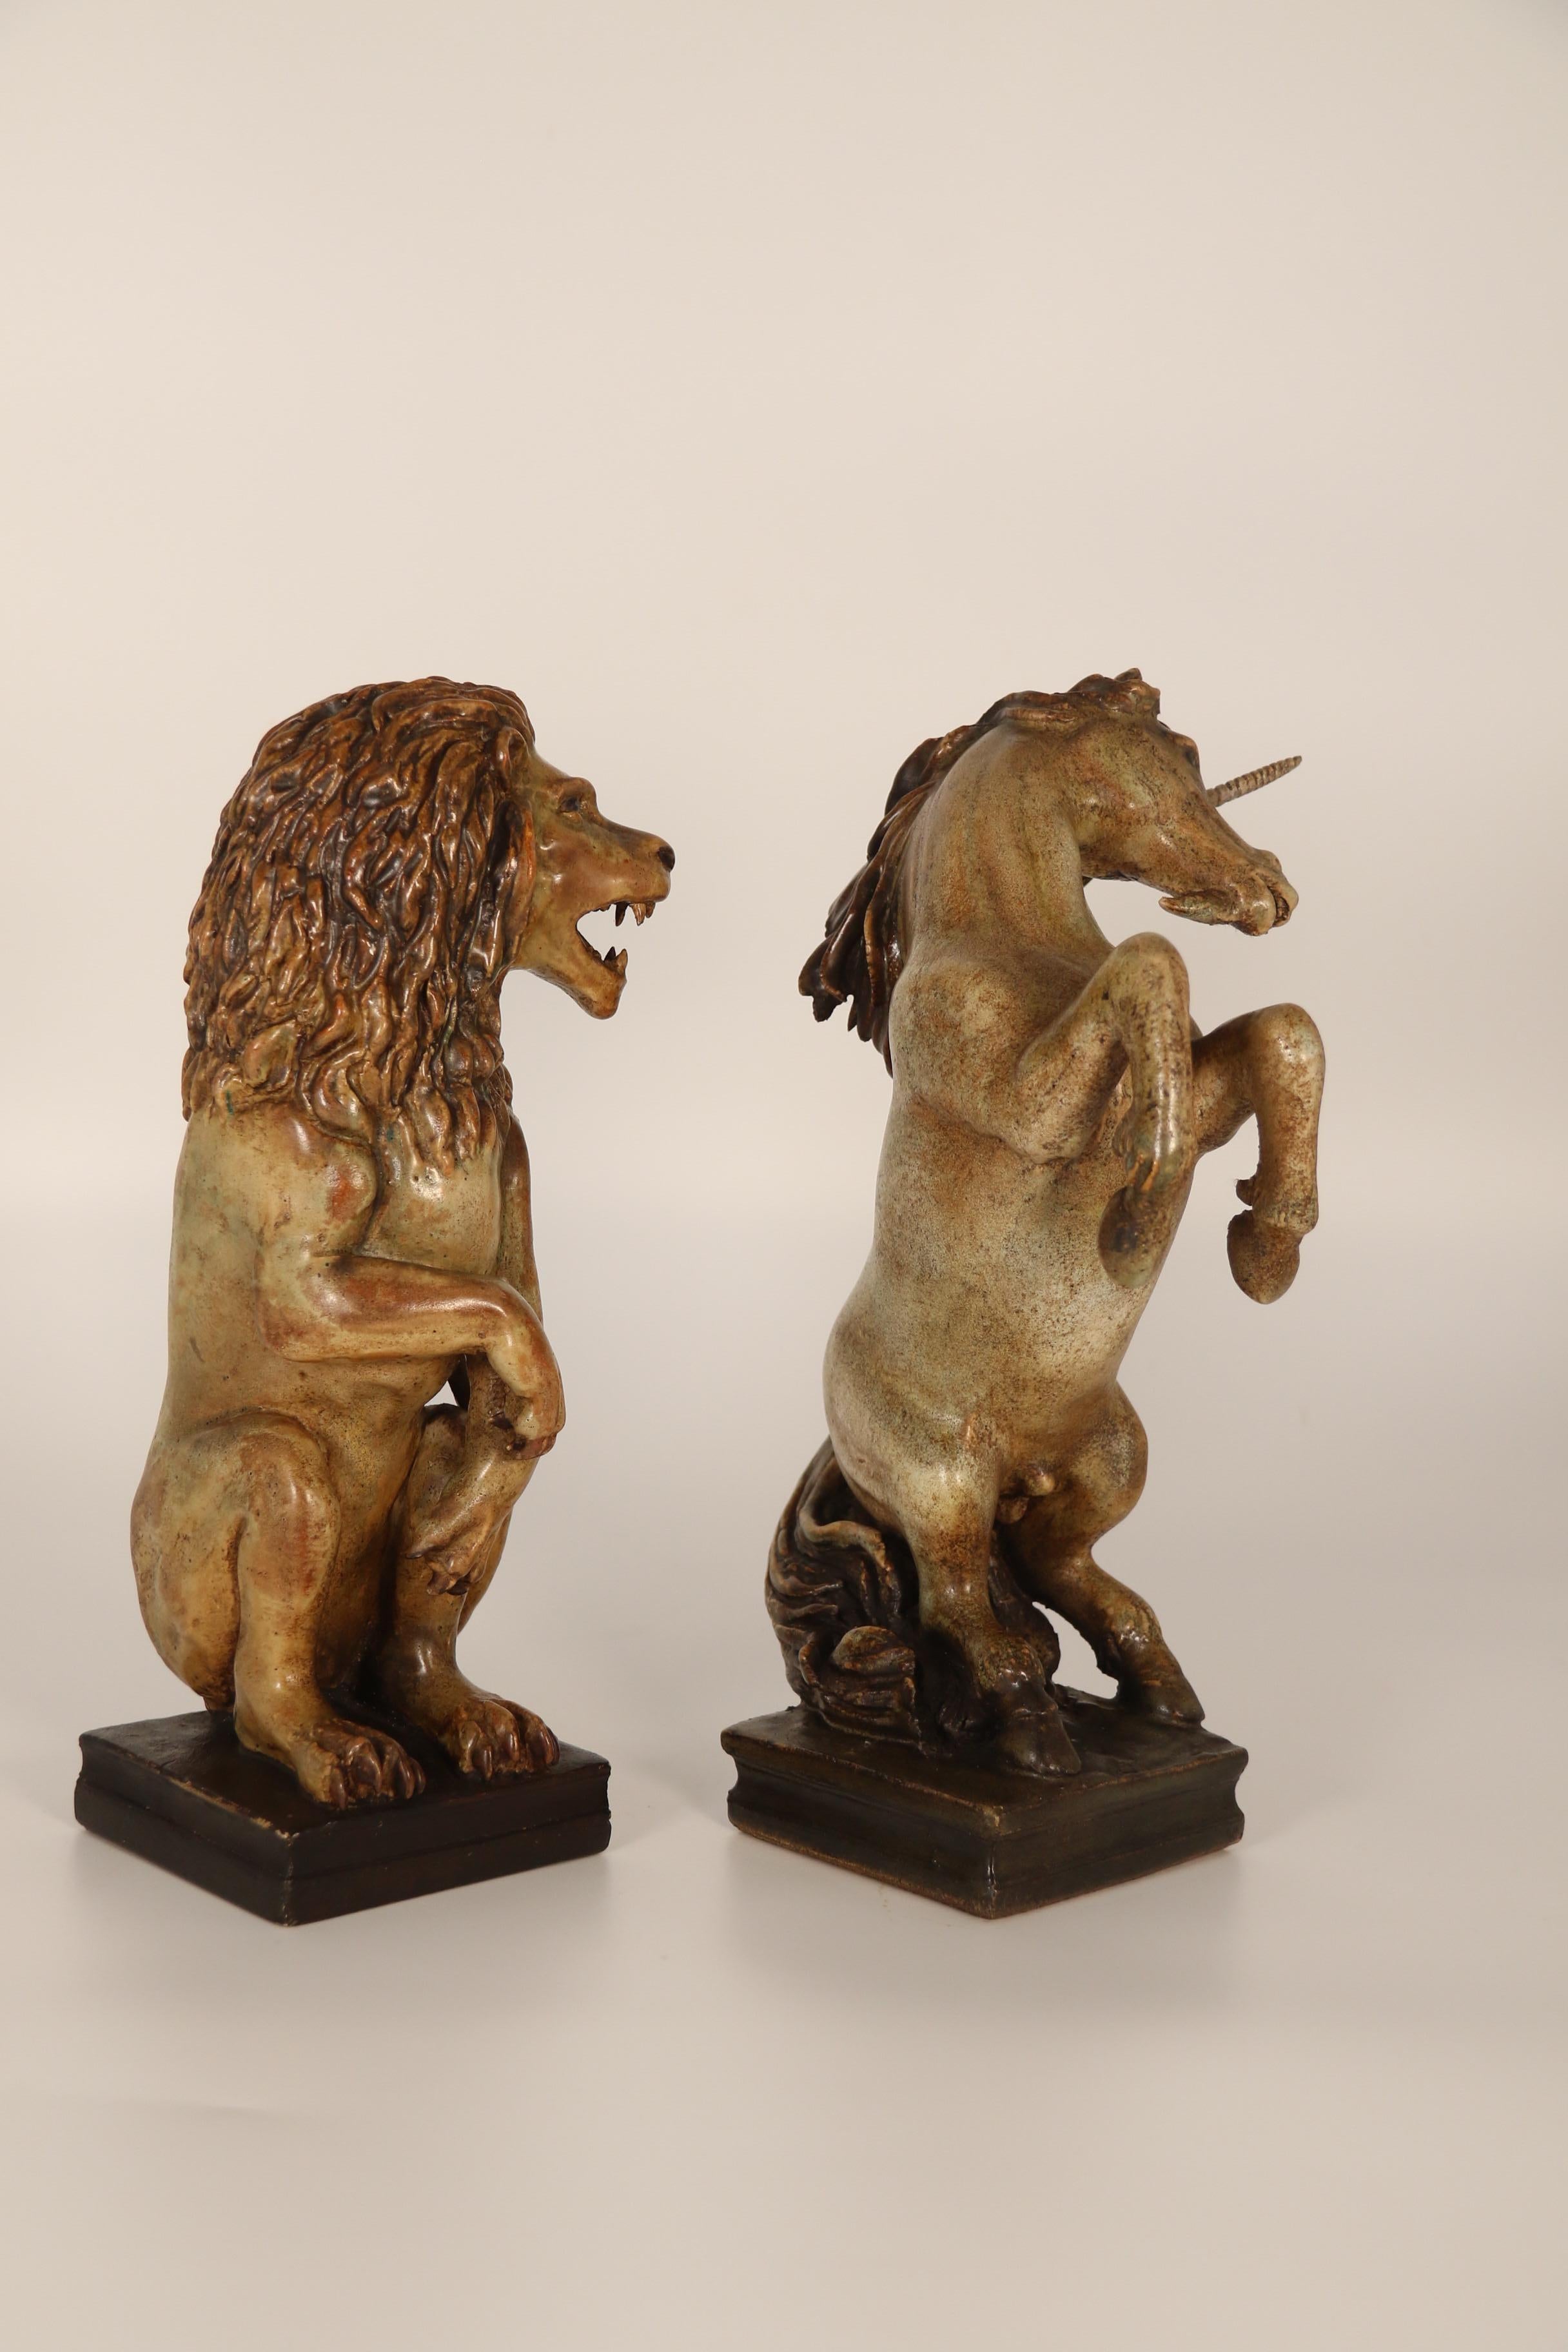 20th Century A pair of art pottery hand sculpted figures of a heraldic lion and unicorn. For Sale